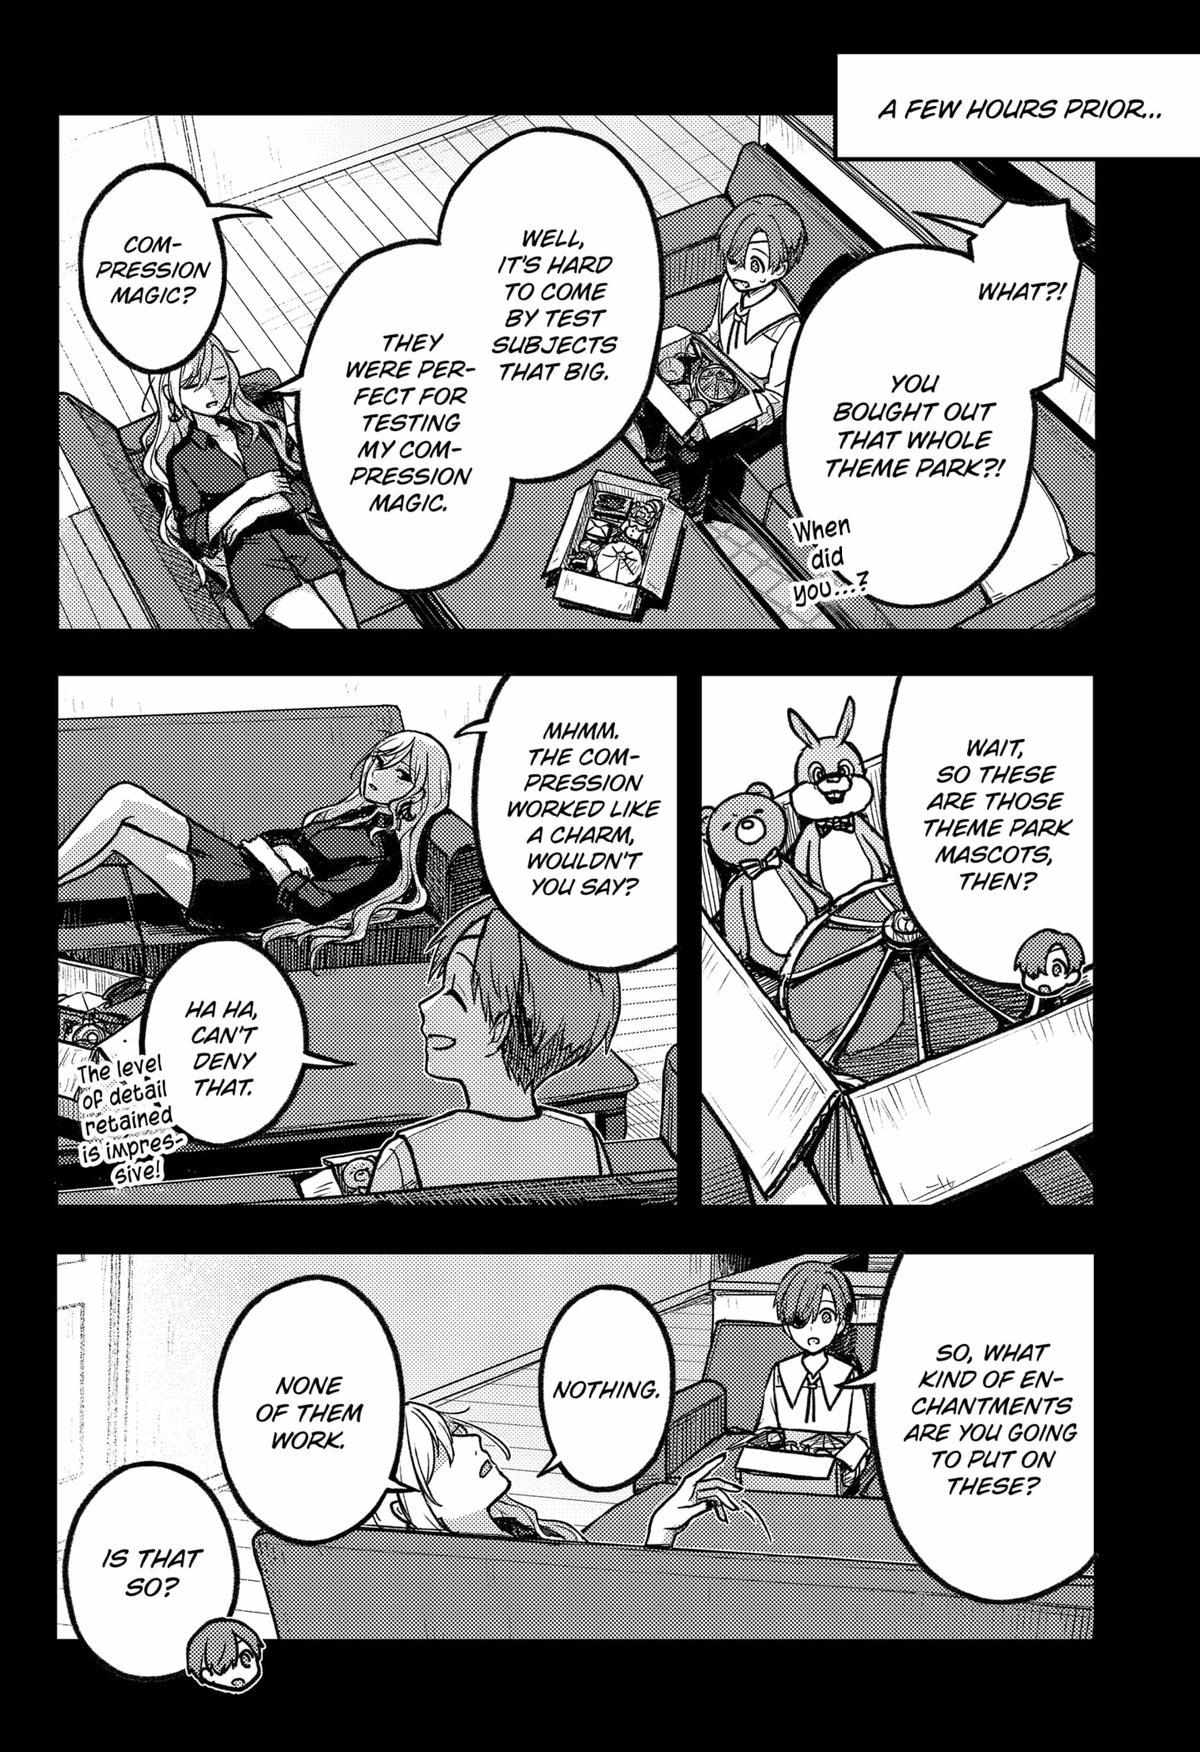 Witch Enforcer - 1 page 74-02ececbe